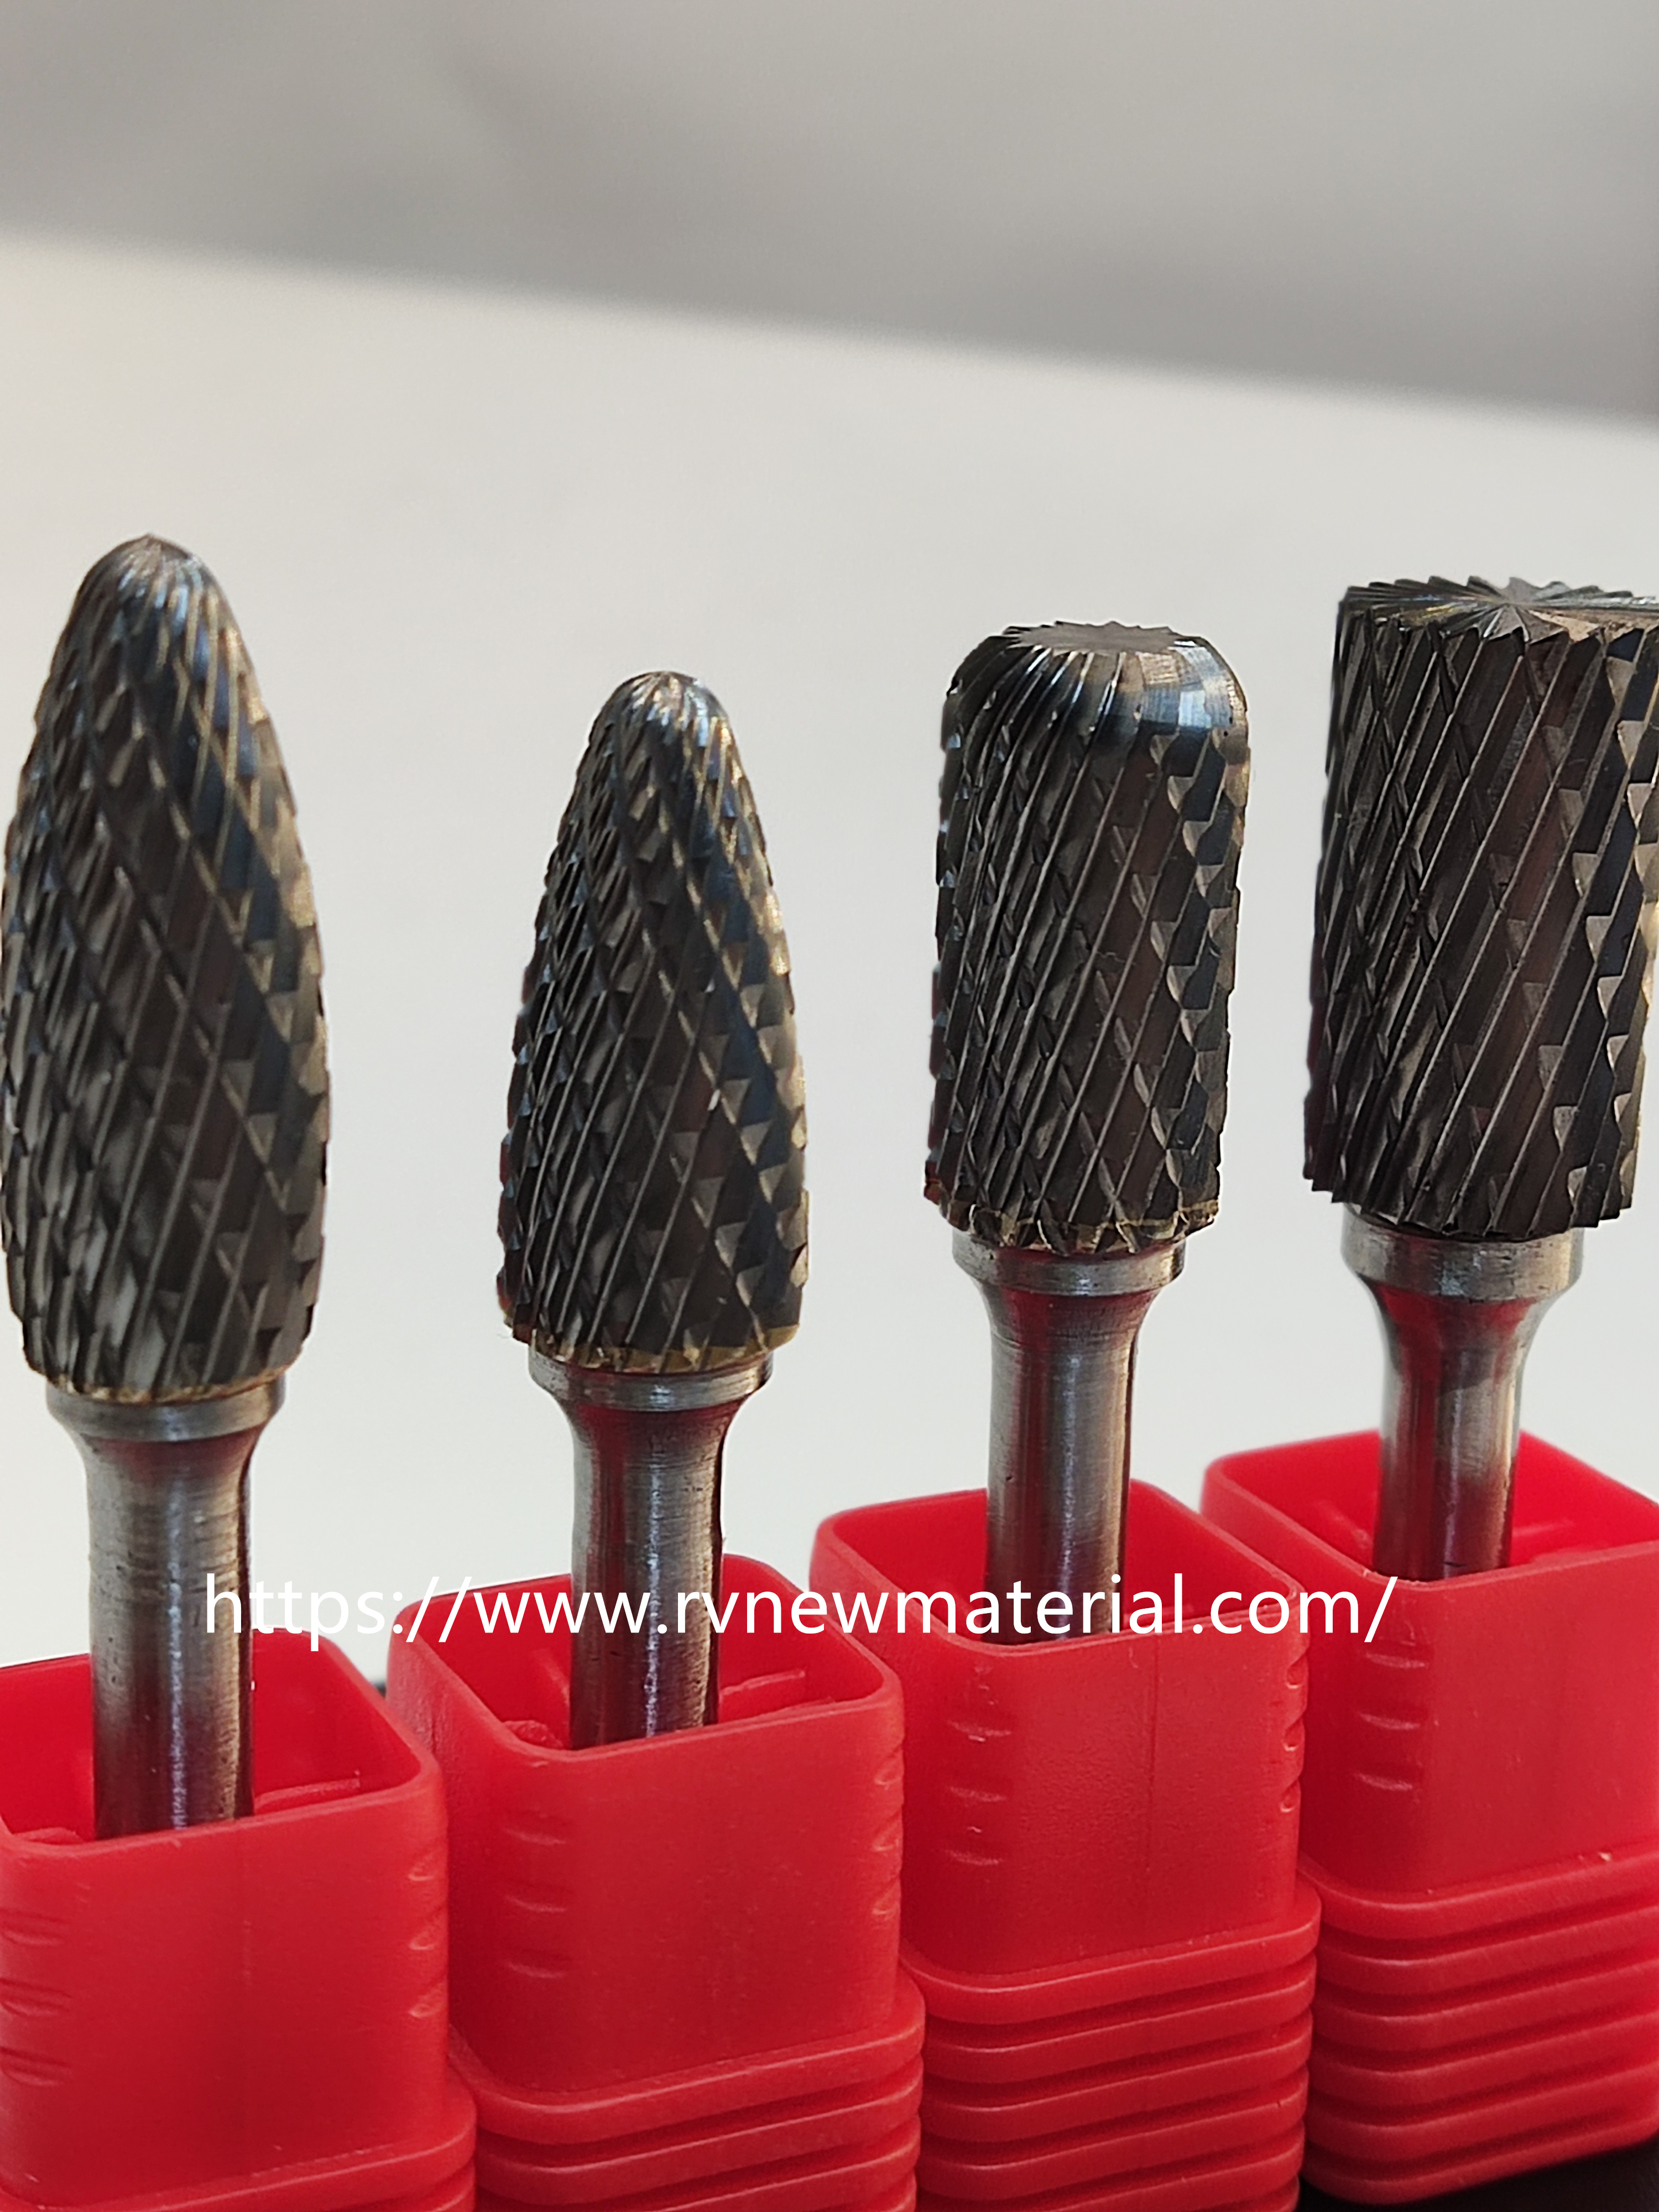 Metalworking Milling CNC Tool Tungsten Carbide Burr Carbide Rotary File